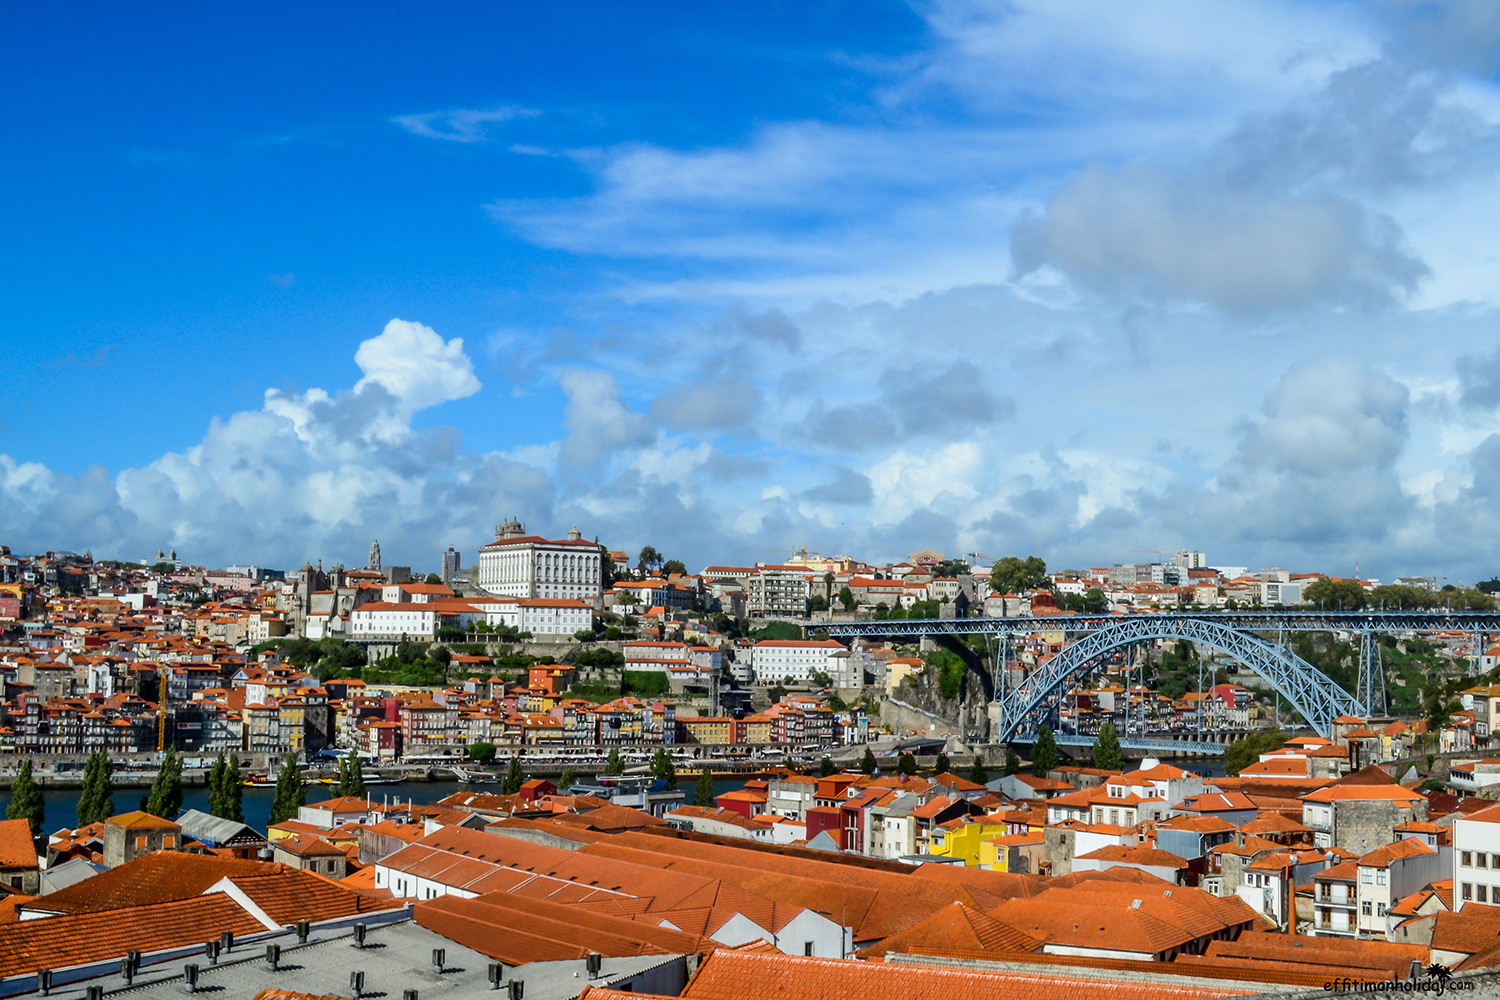 The beautiful city of Porto will charm you with its old architecture and port wine